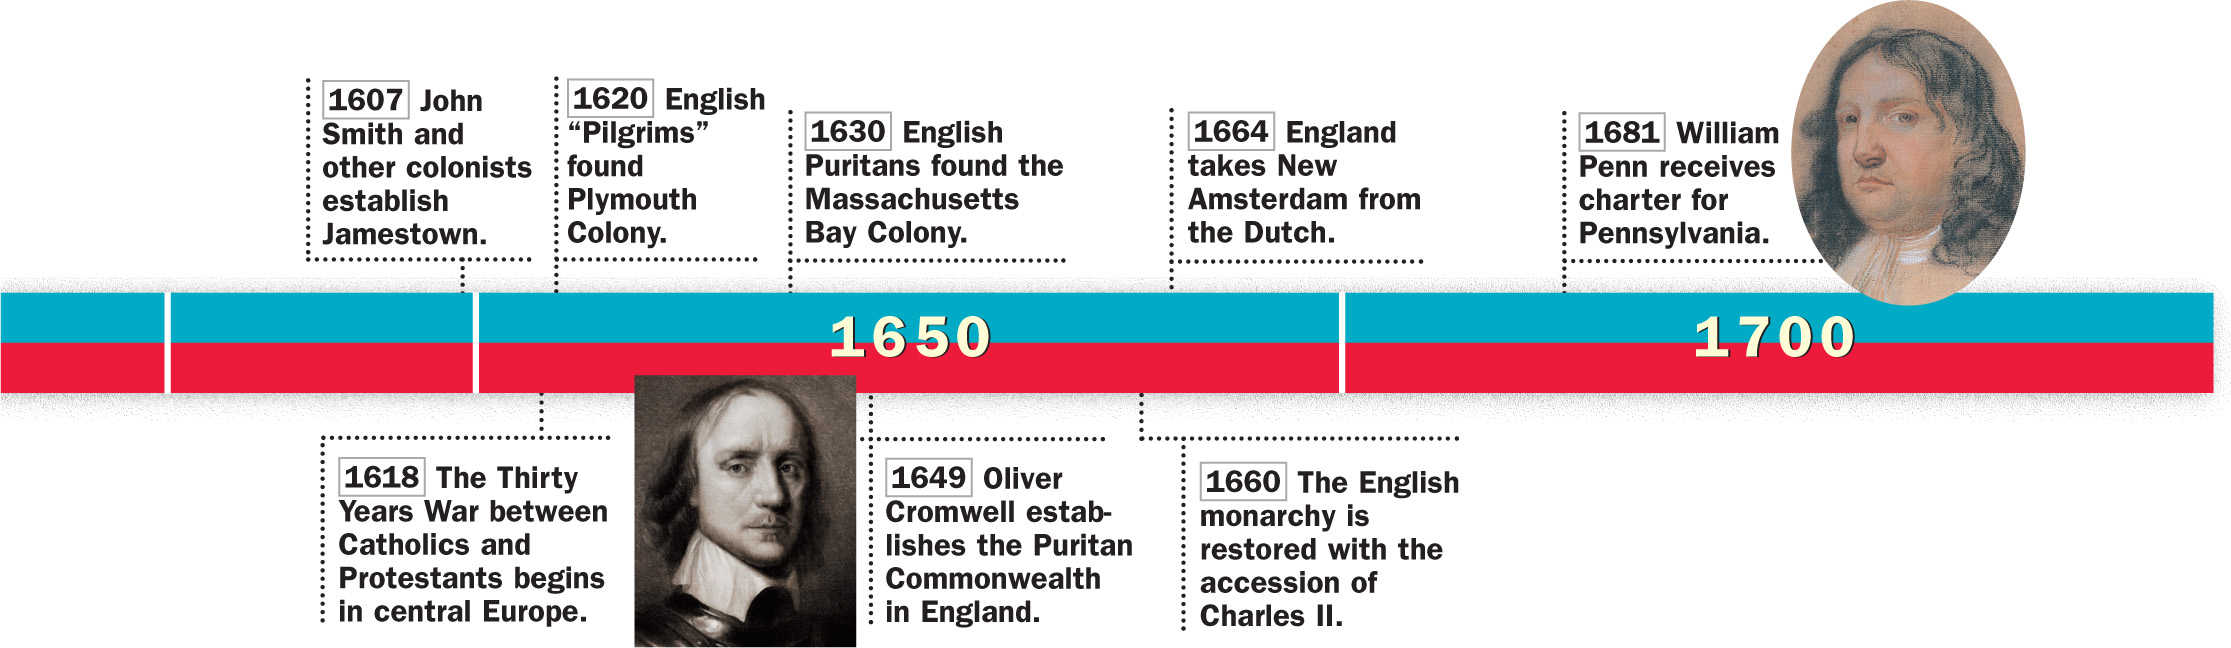 A timeline of historical events from 1500 to 1700 in both the Americas and the world